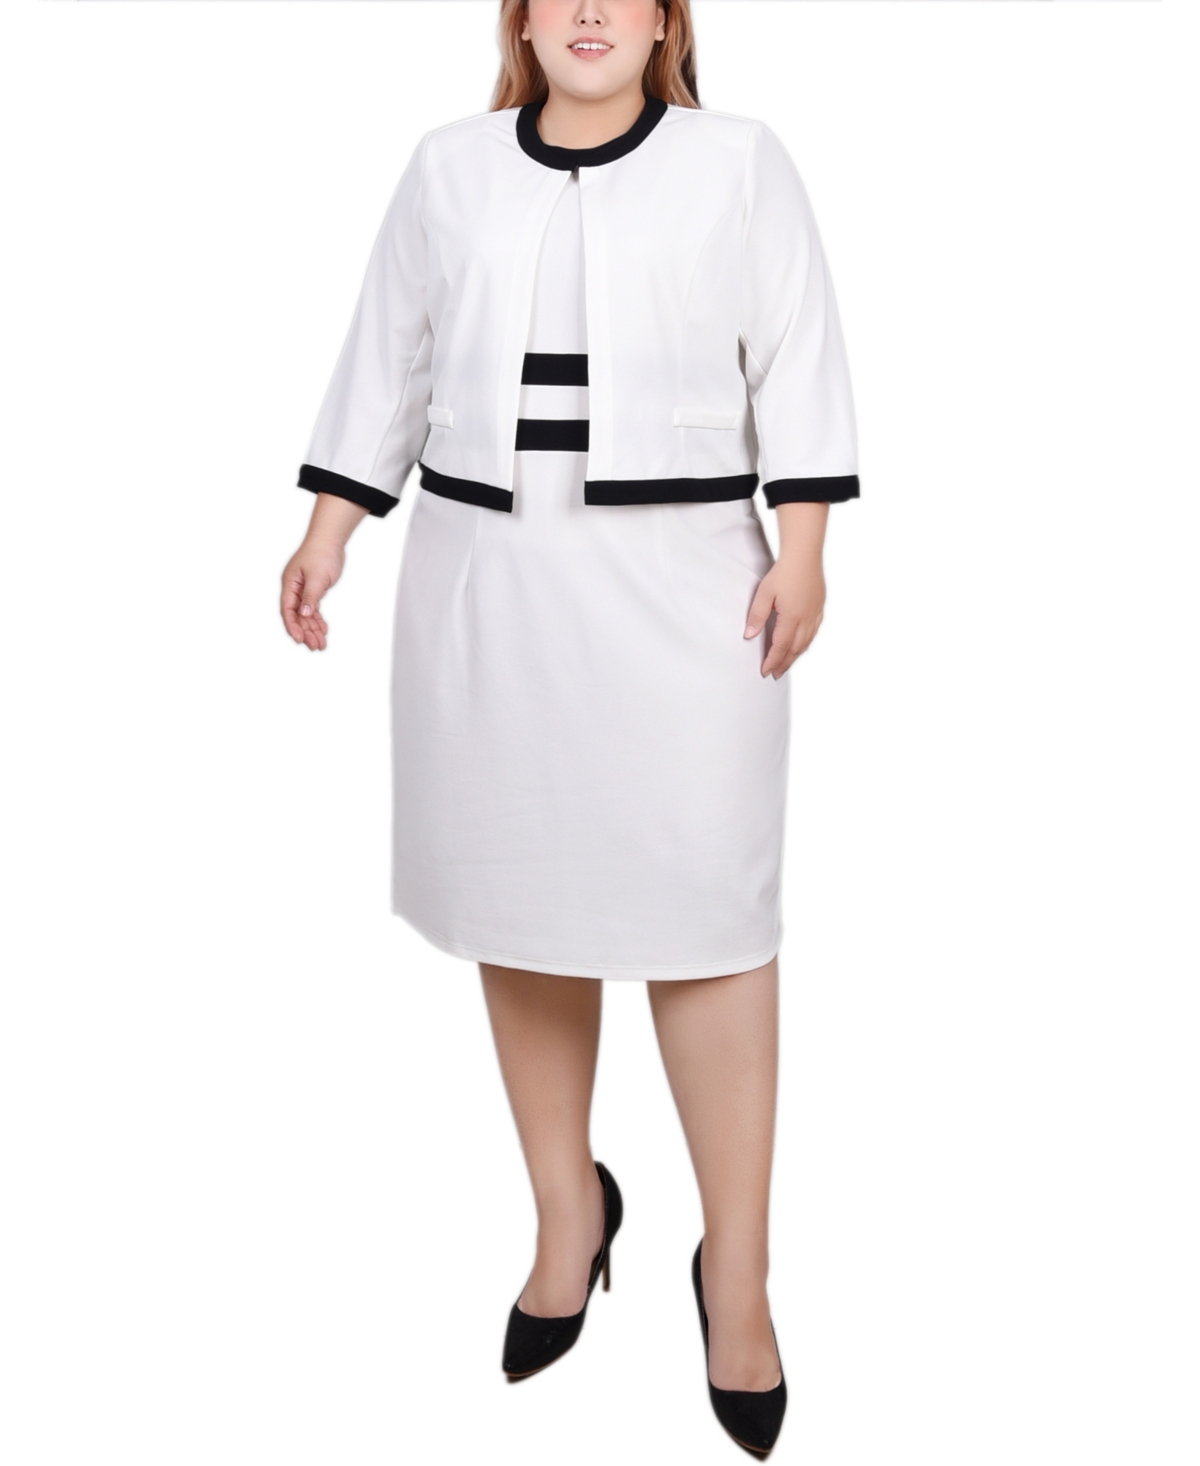 Ny Collection Plus Size Elbow Sleeve Colorblocked Dress, 2 Piece Set In White Black